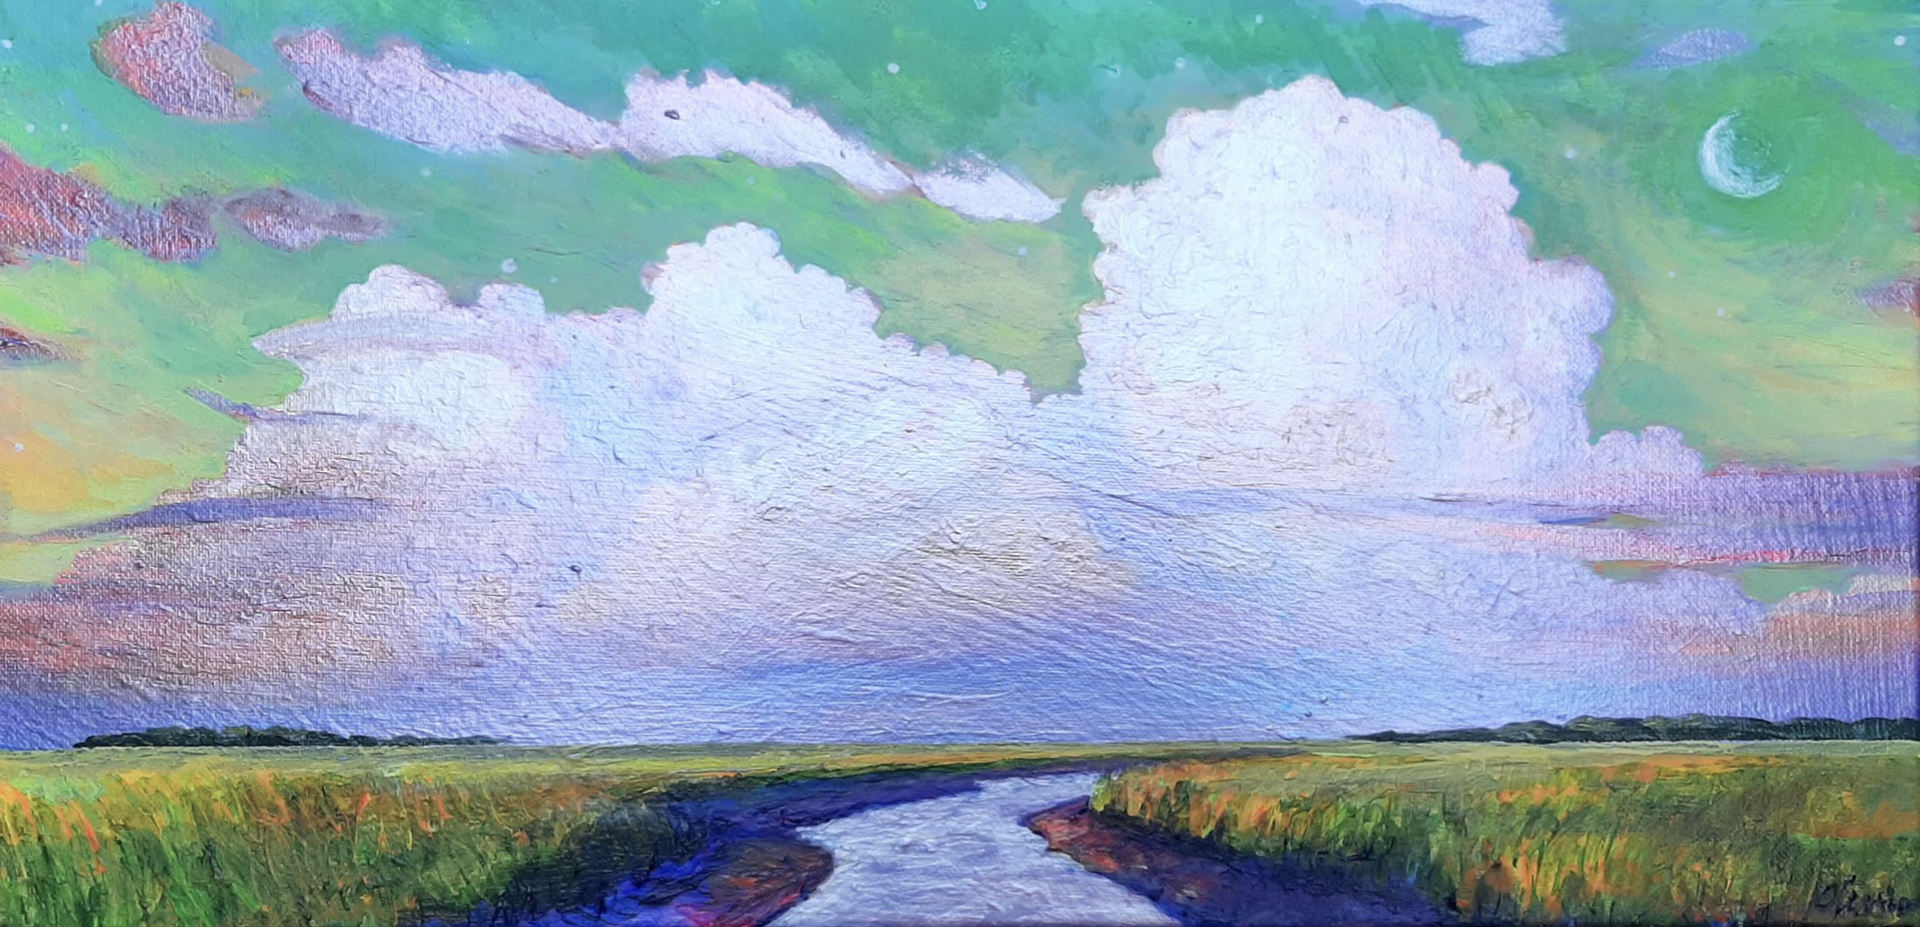 "River of a Dream" original acrylic painting by Olessia Maximenko